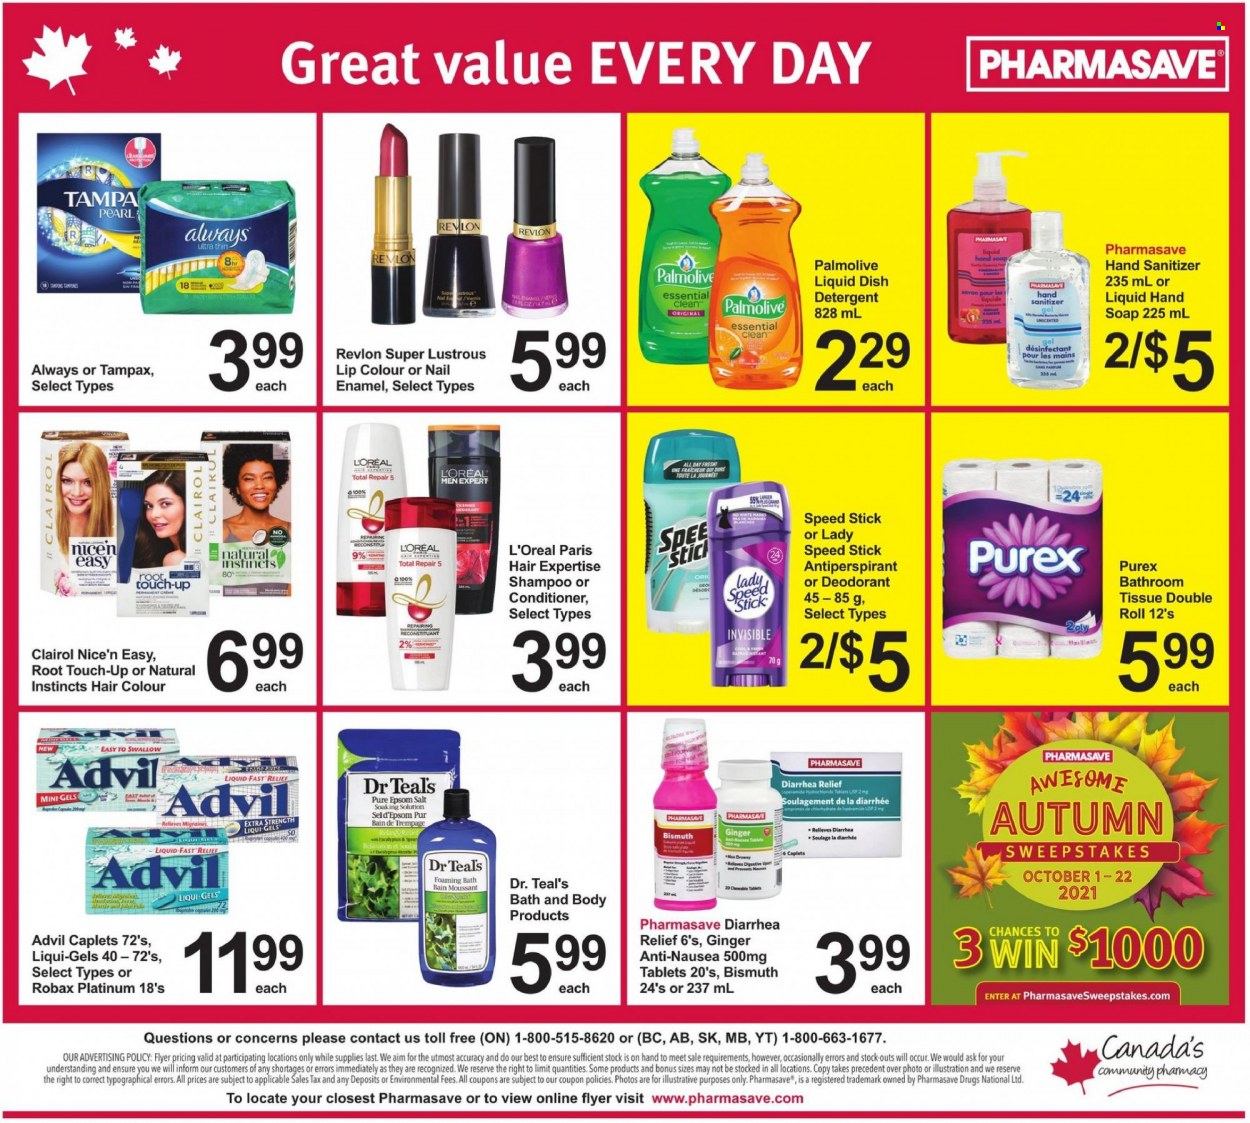 thumbnail - Pharmasave Flyer - October 15, 2021 - October 21, 2021 - Sales products - soup, tissues, Purex, hand soap, Palmolive, soap, L’Oréal, L’Oréal Men, Root Touch-Up, Clairol, conditioner, Revlon, hair color, anti-perspirant, Speed Stick, hand sanitizer, nail enamel, Advil Rapid, detergent, shampoo, Tampax, deodorant. Page 12.